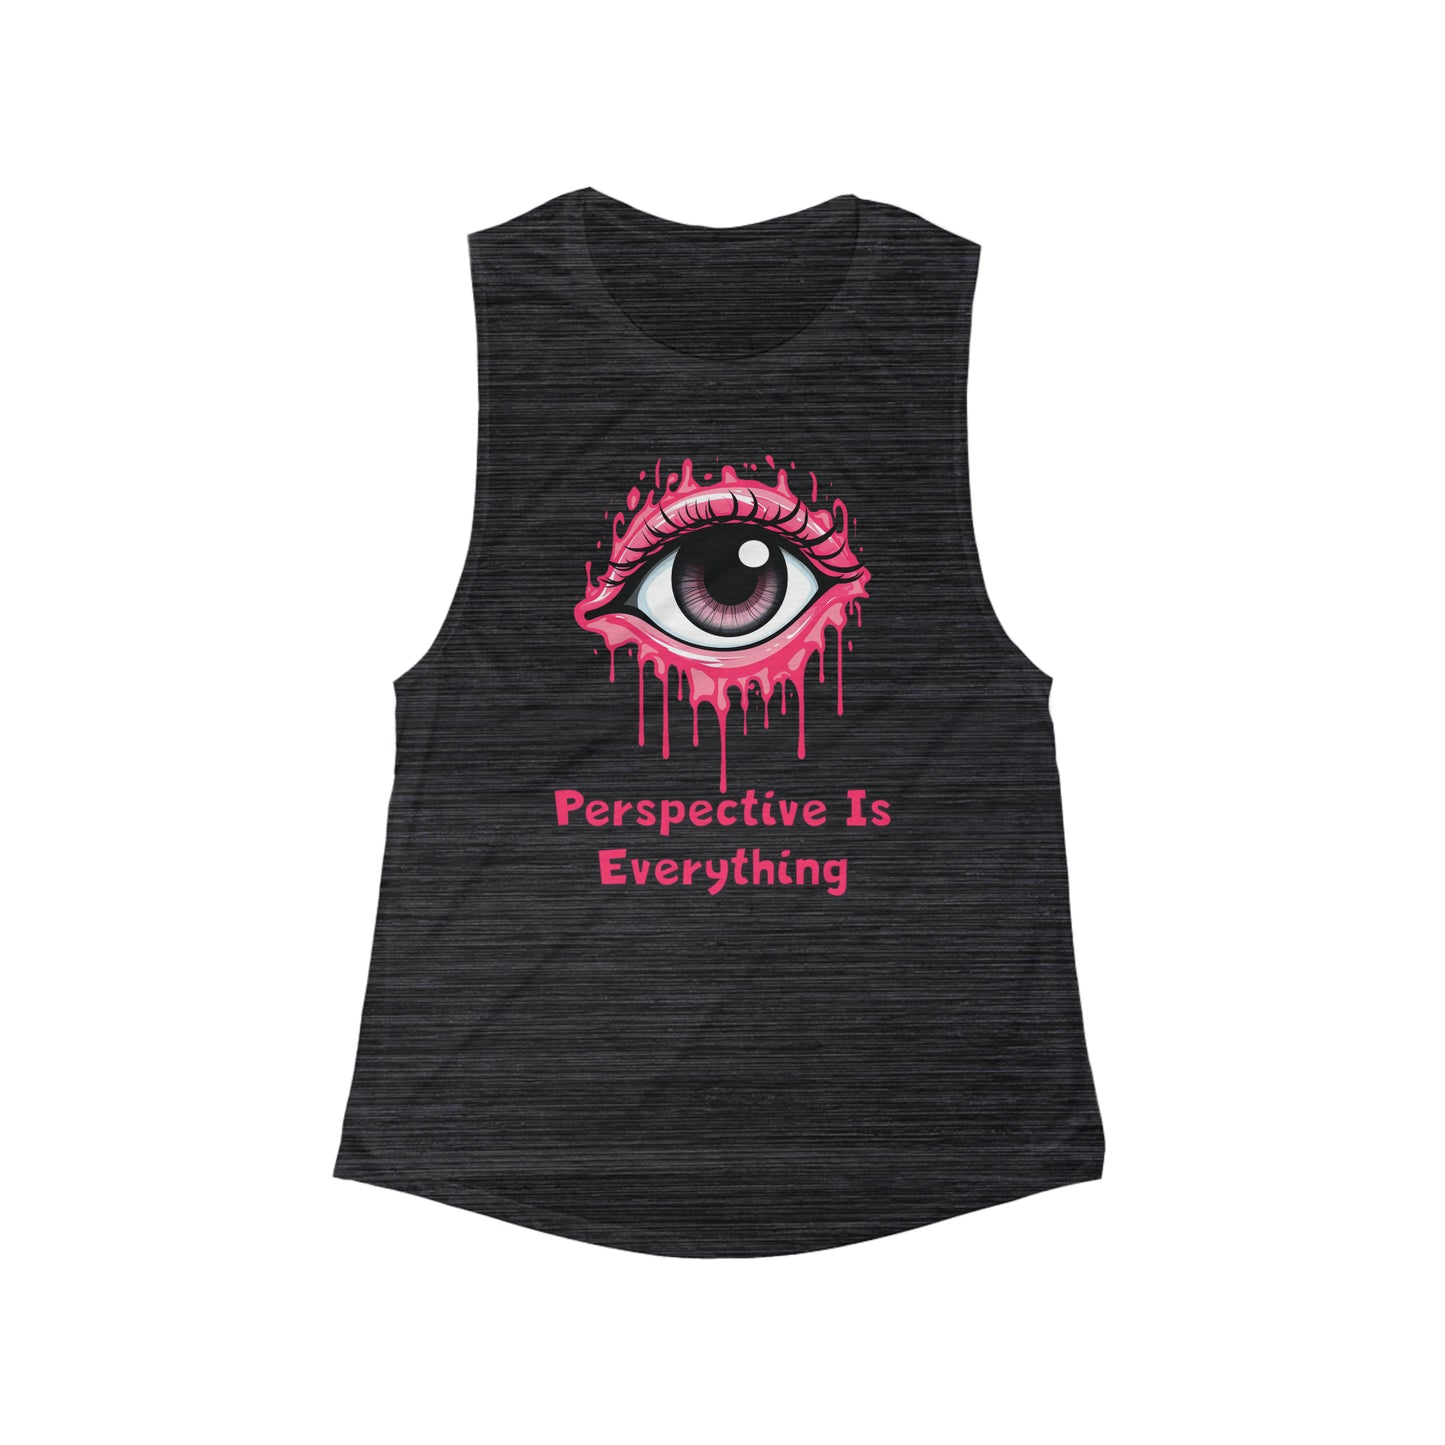 Perspective is Everything: Pink | Women's Flowy Scoop Muscle Tank